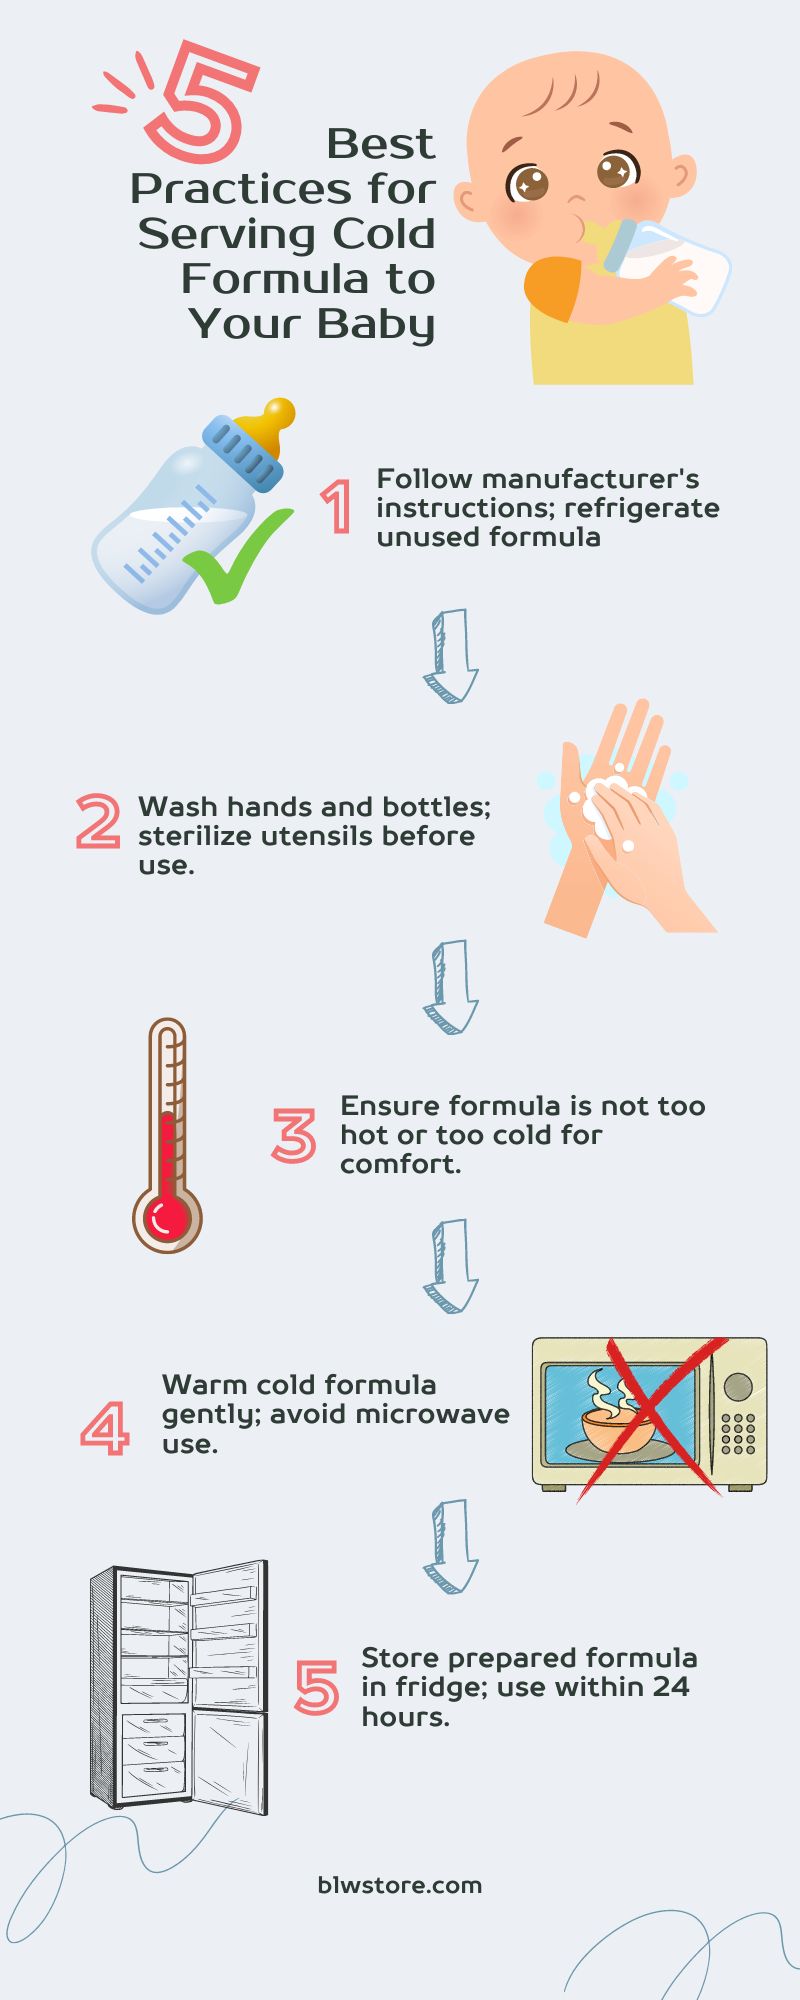 Best-practices-to-serve-cold-formula-to-your-baby